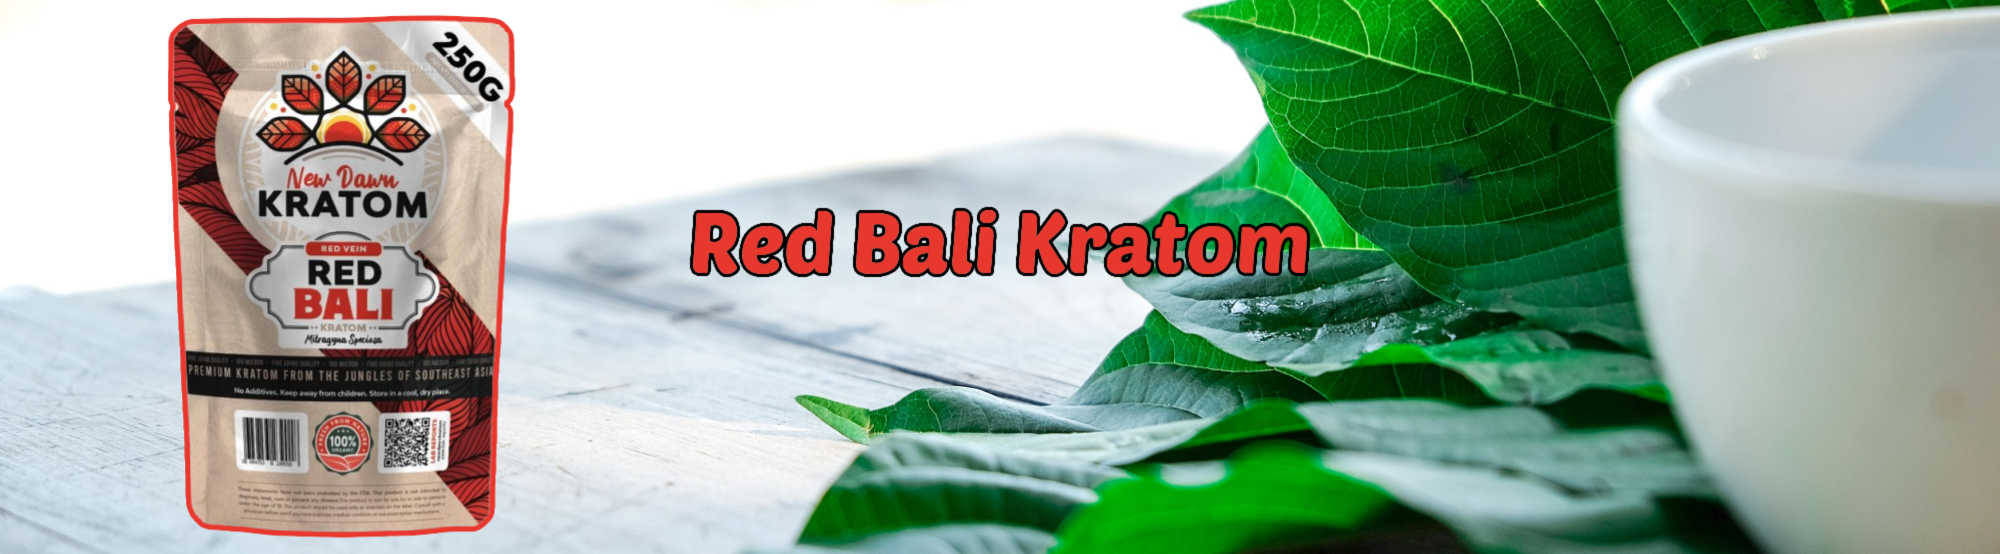 image of red bali kratom for relaxation